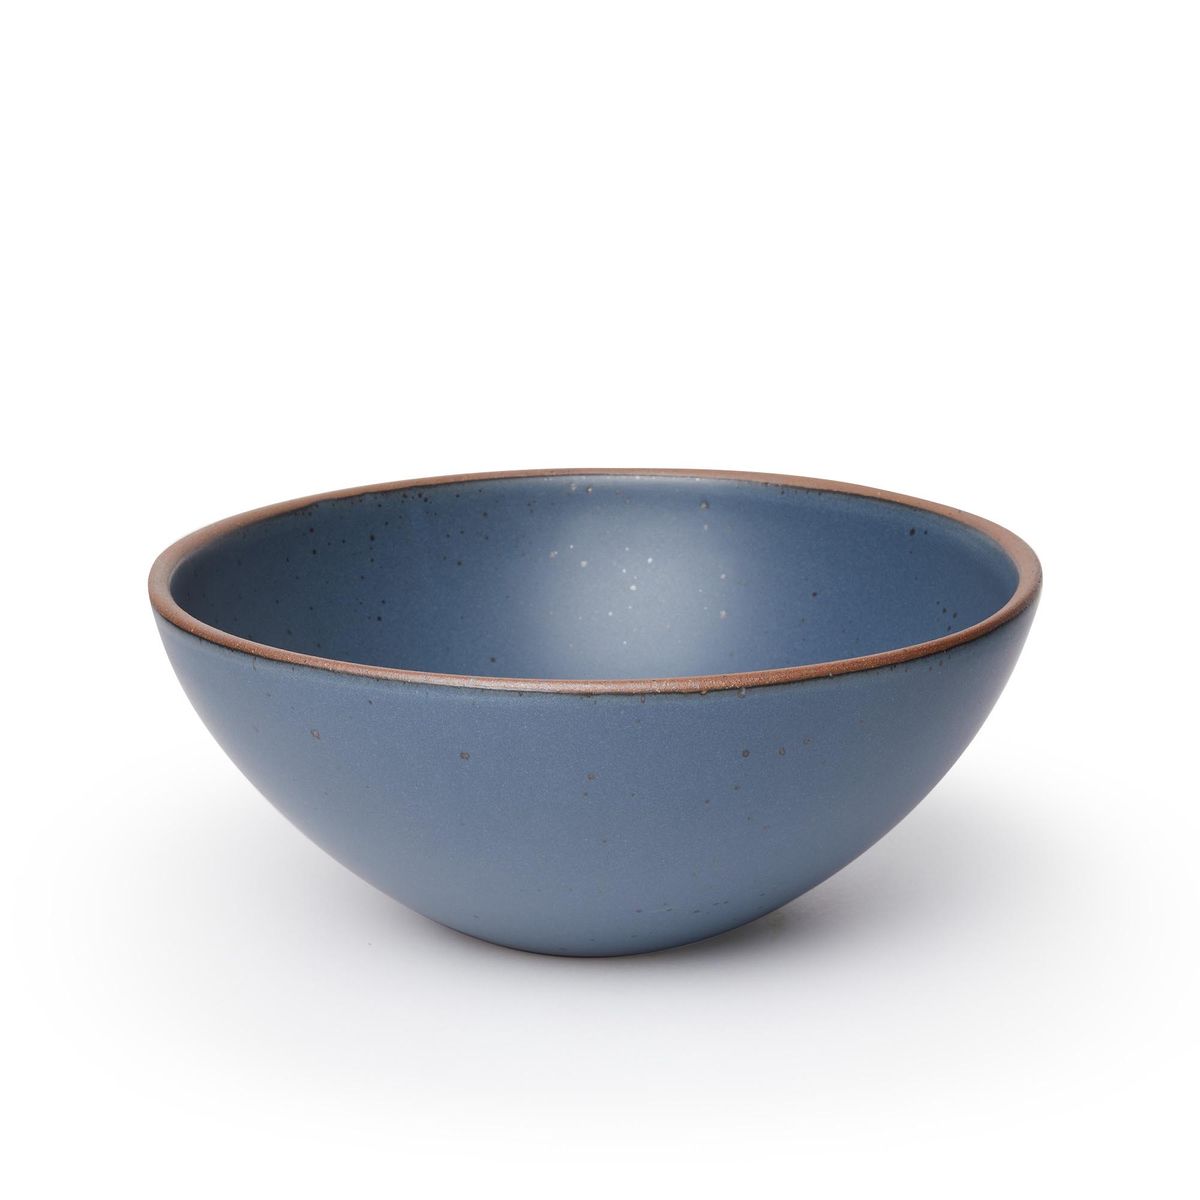 A large ceramic mixing bowl in a toned-down navy color featuring iron speckles and an unglazed rim